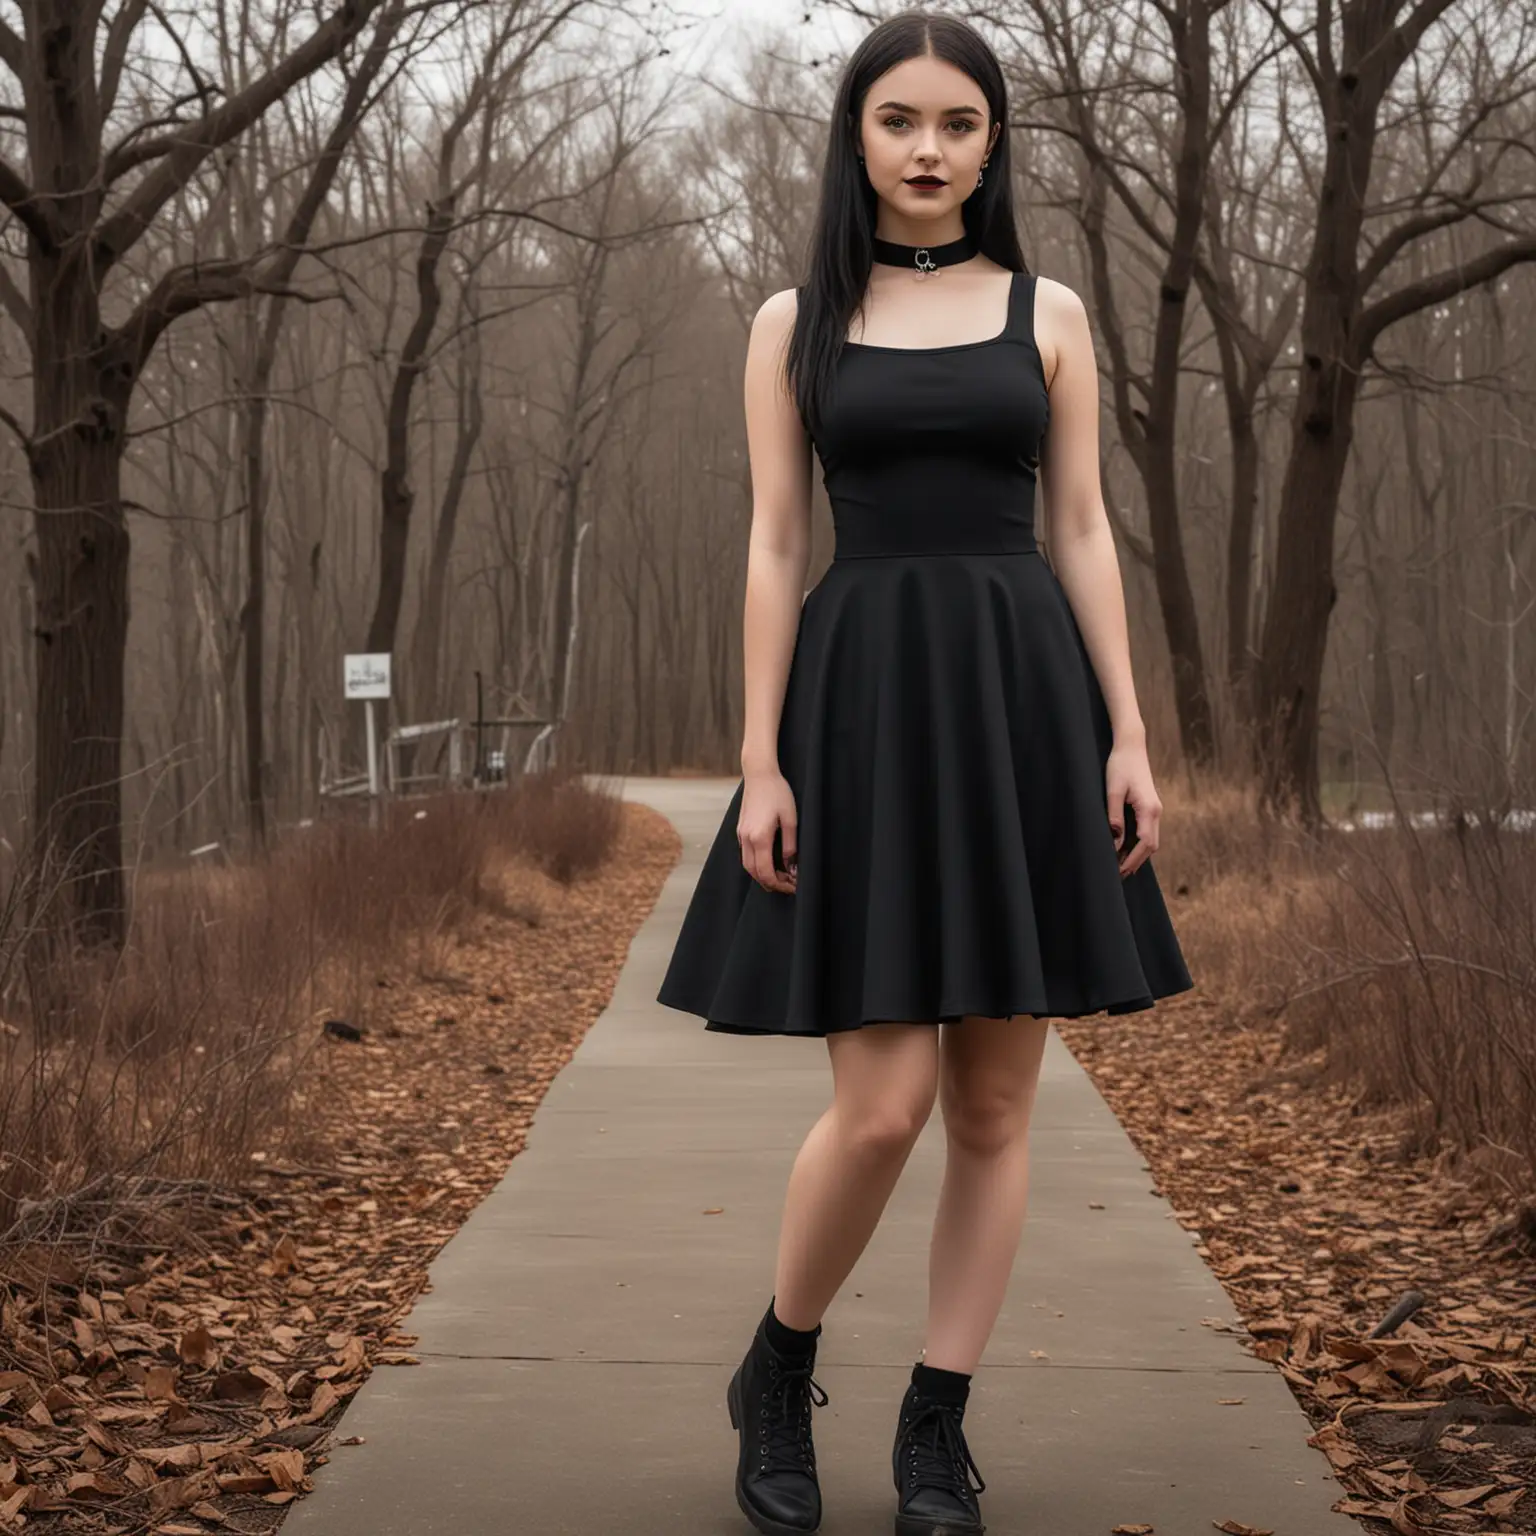 mockup for a black tank top style skater style dress.   the model should be female and resemble wednesday addams.  the background of the photo should look like the outdoors at  nevermore academy